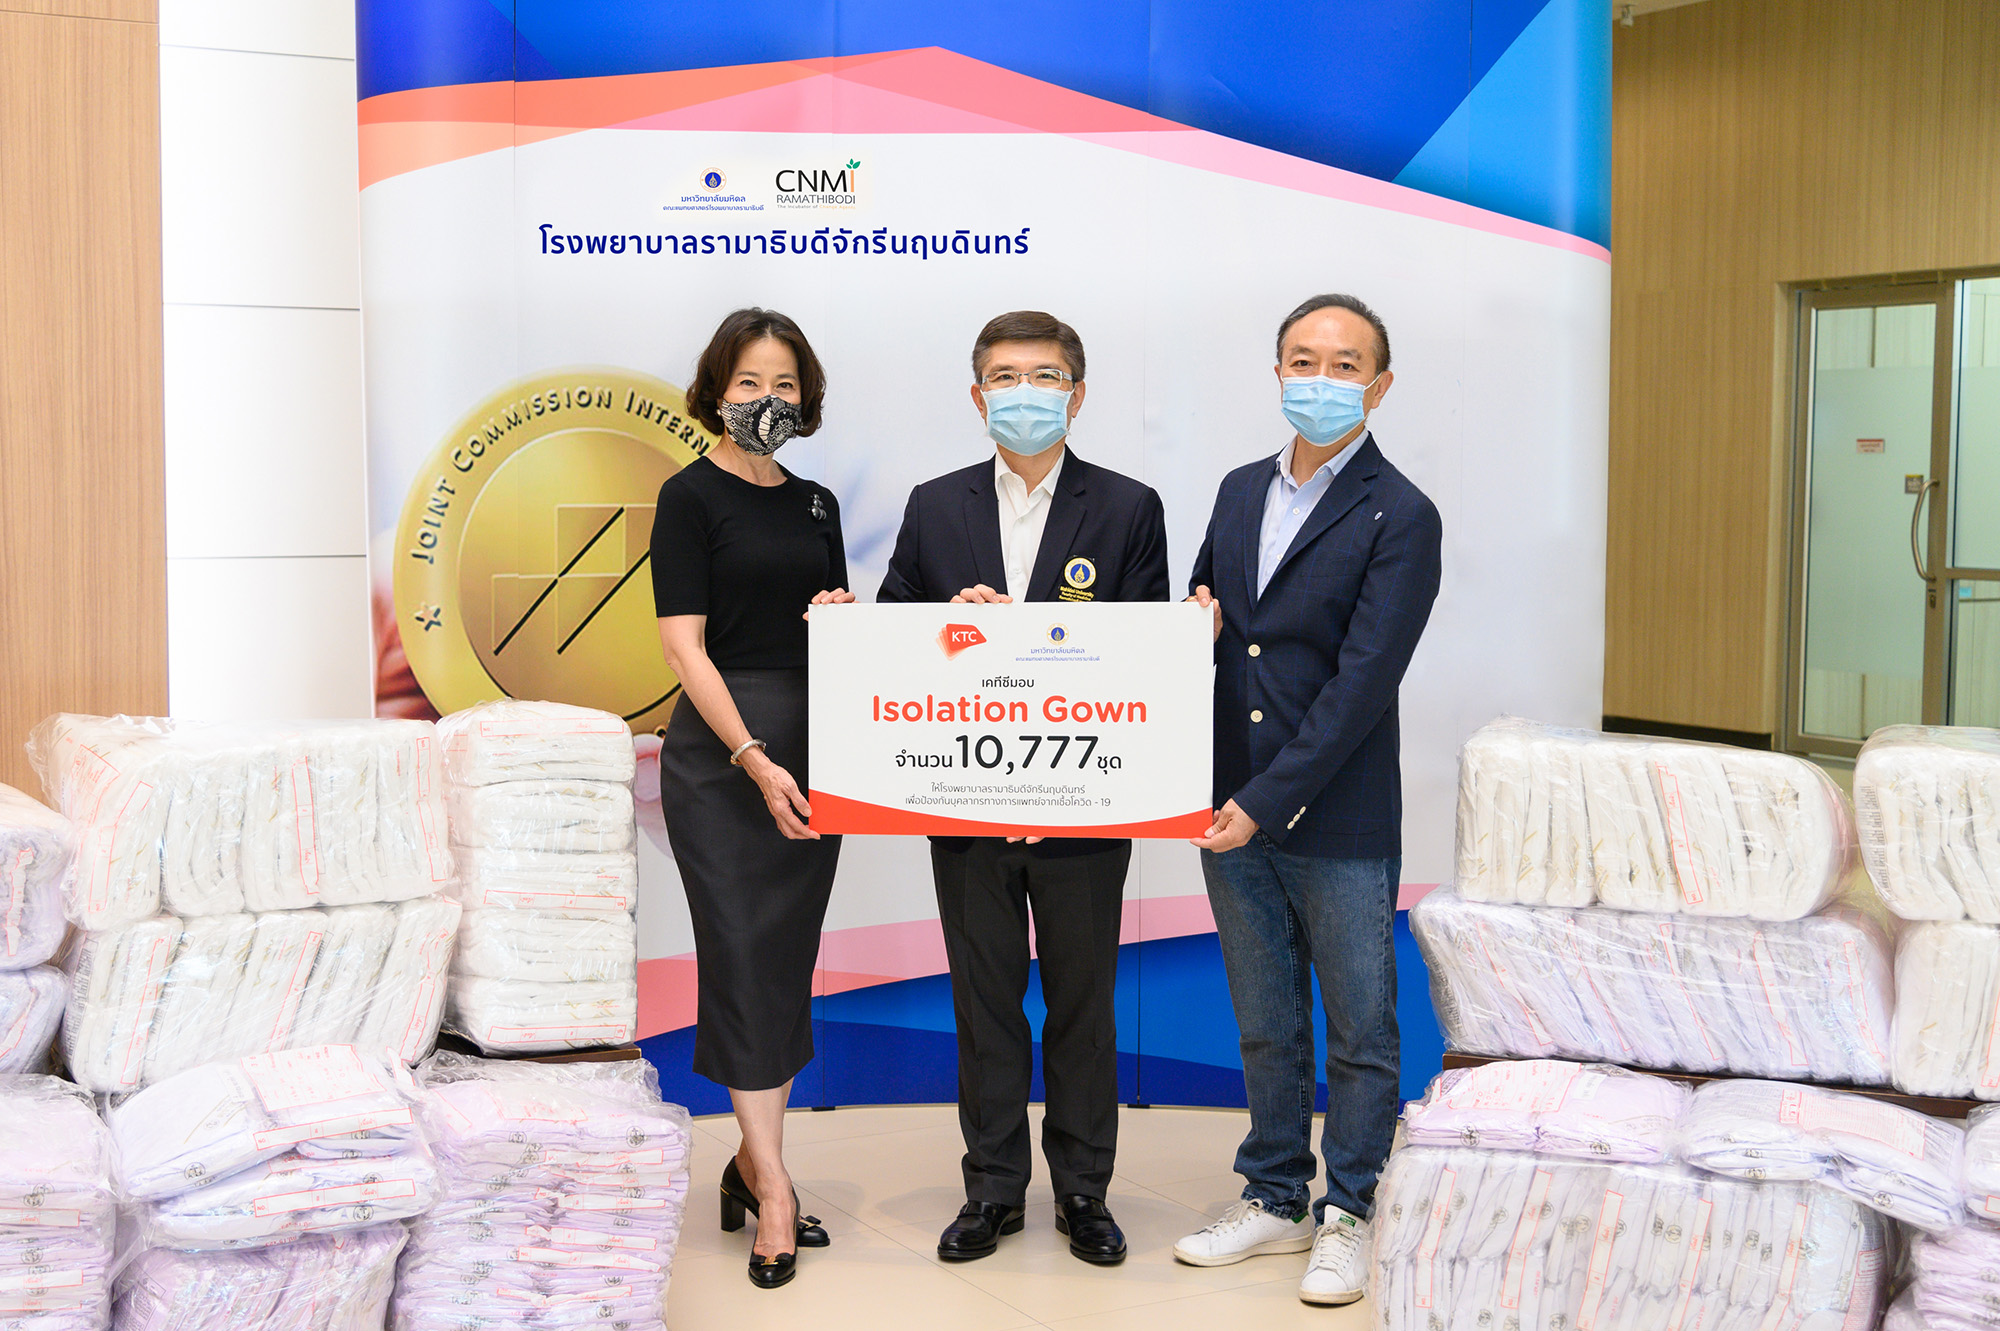 Photo Release: KTC hands over 10,777 Isolation Gowns to Ramadhibodi Chakri Naruebodindra Hospital to prevent medical personnel from